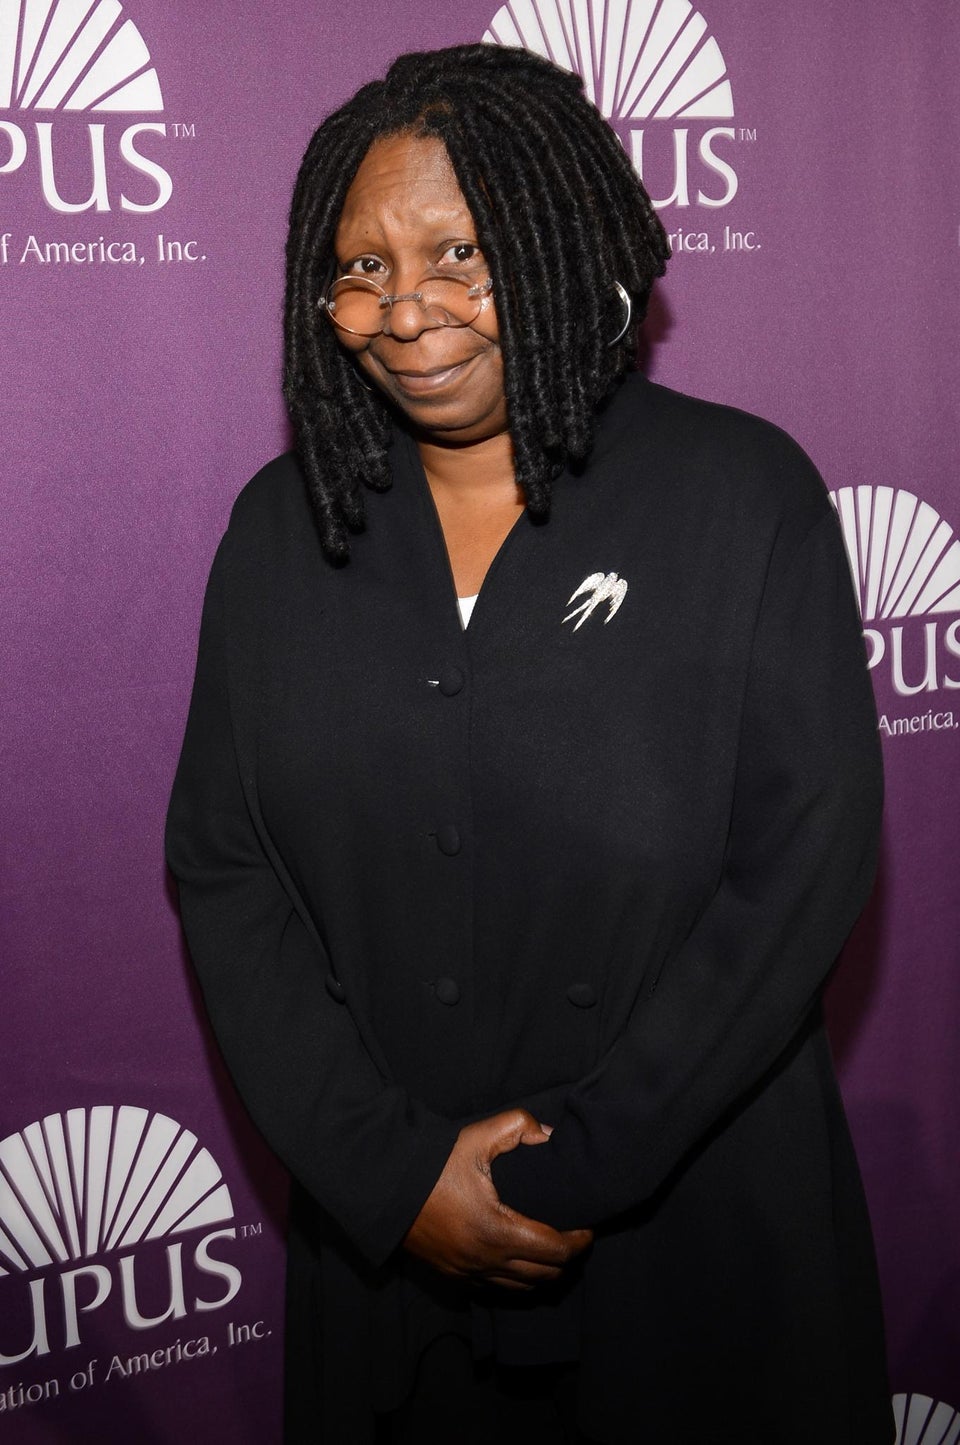 ESSENCE Poll: Do You Agree with Whoopi Goldberg’s Comments on Being American, not African-American?